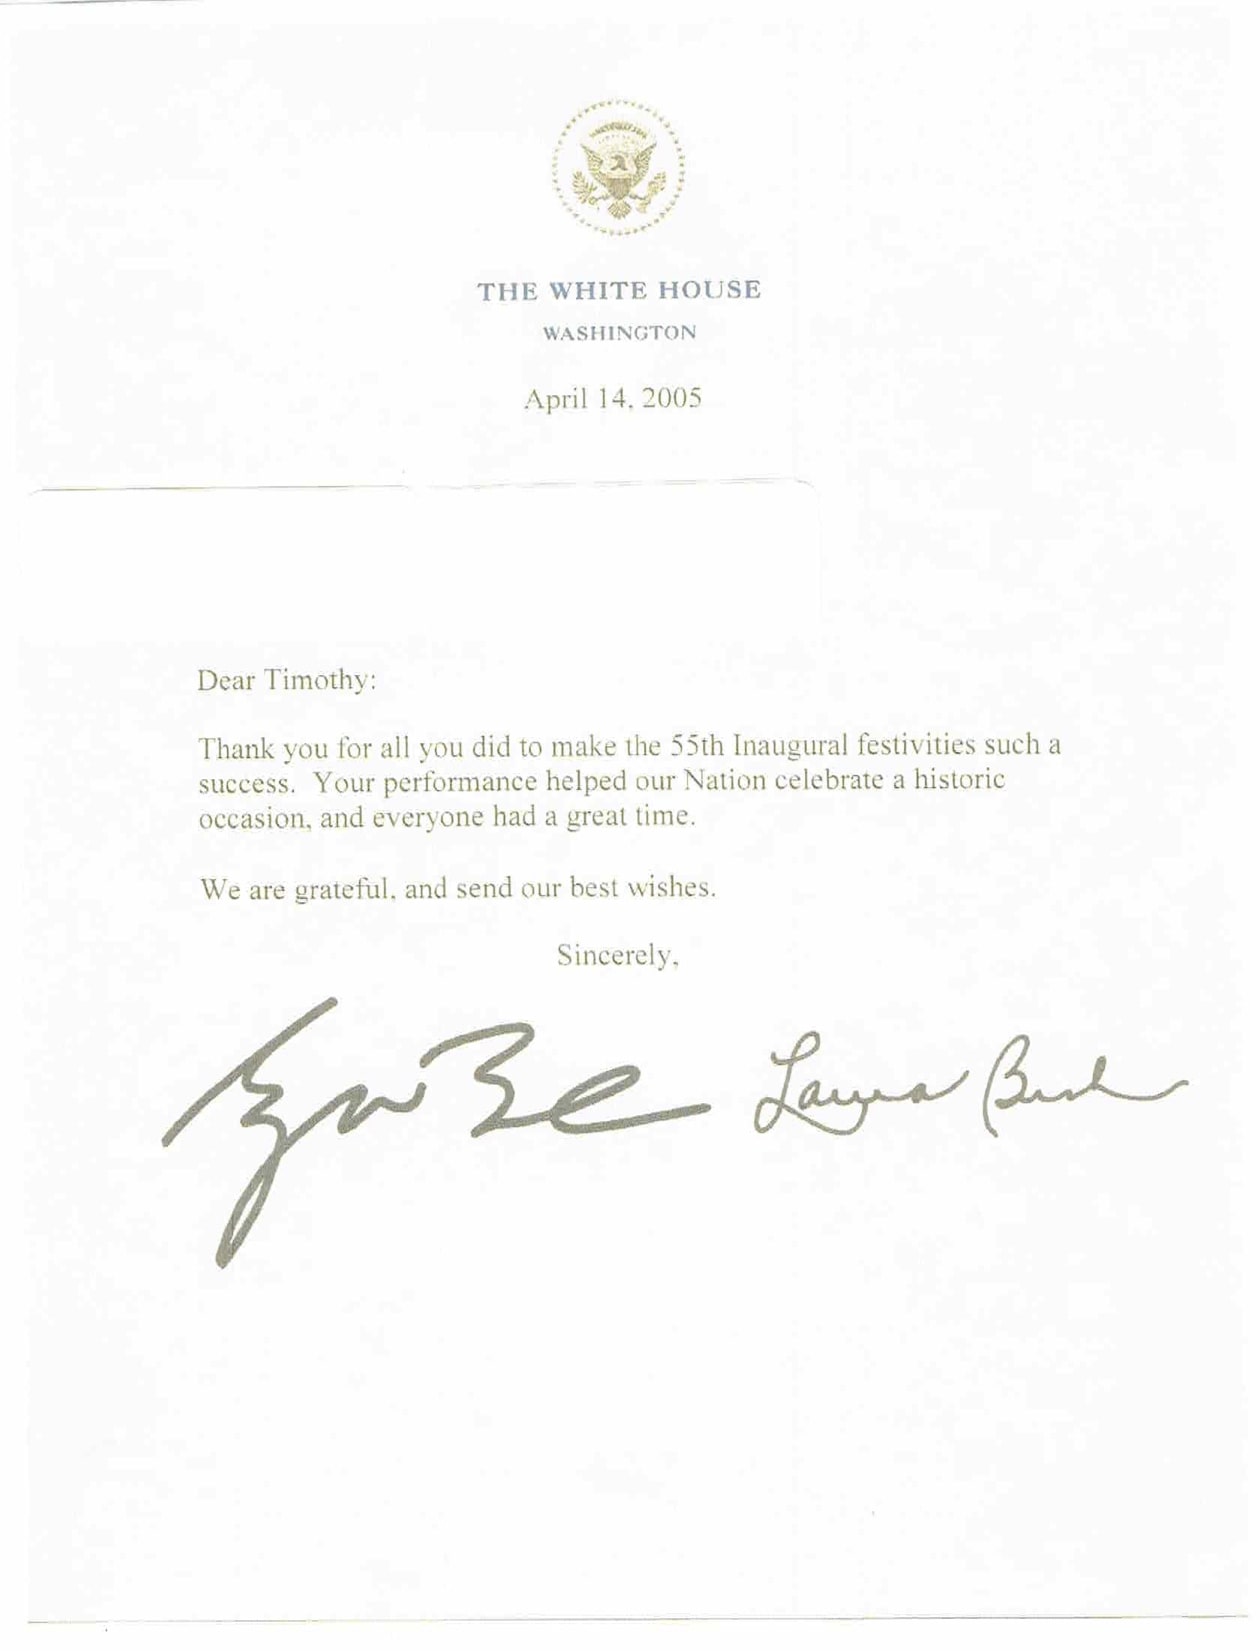 thank-you-note-from-president-george-bush-to-magician-tim-hall